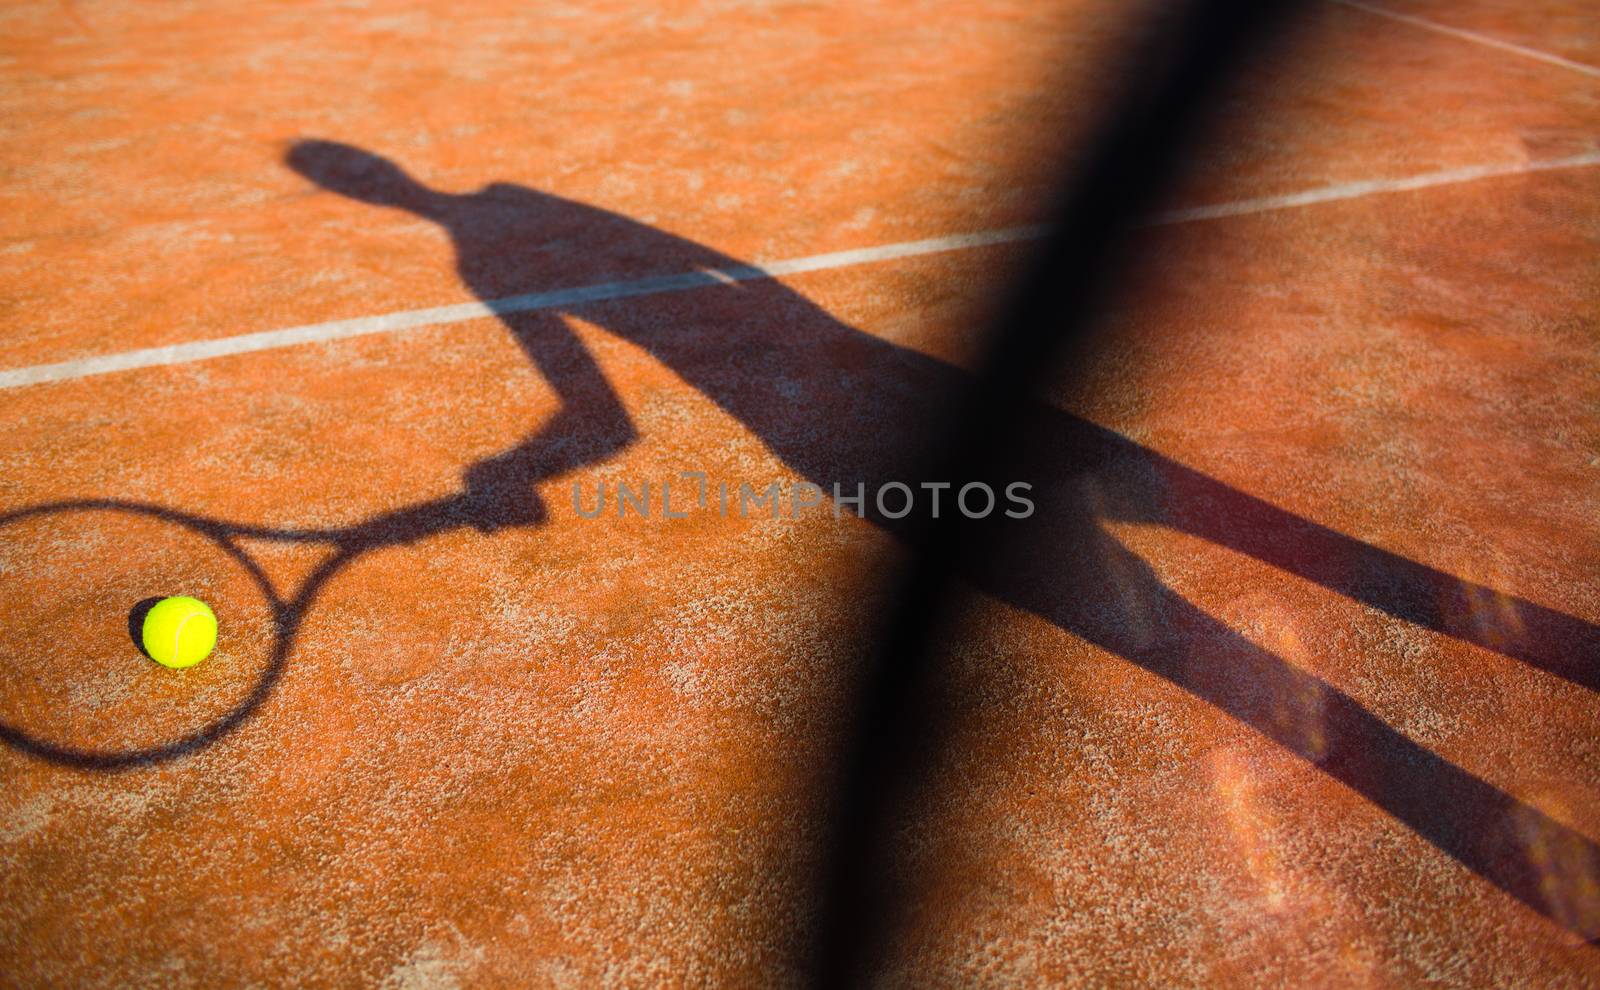 Shadow of a tennis player in action on a tennis court by viktor_cap